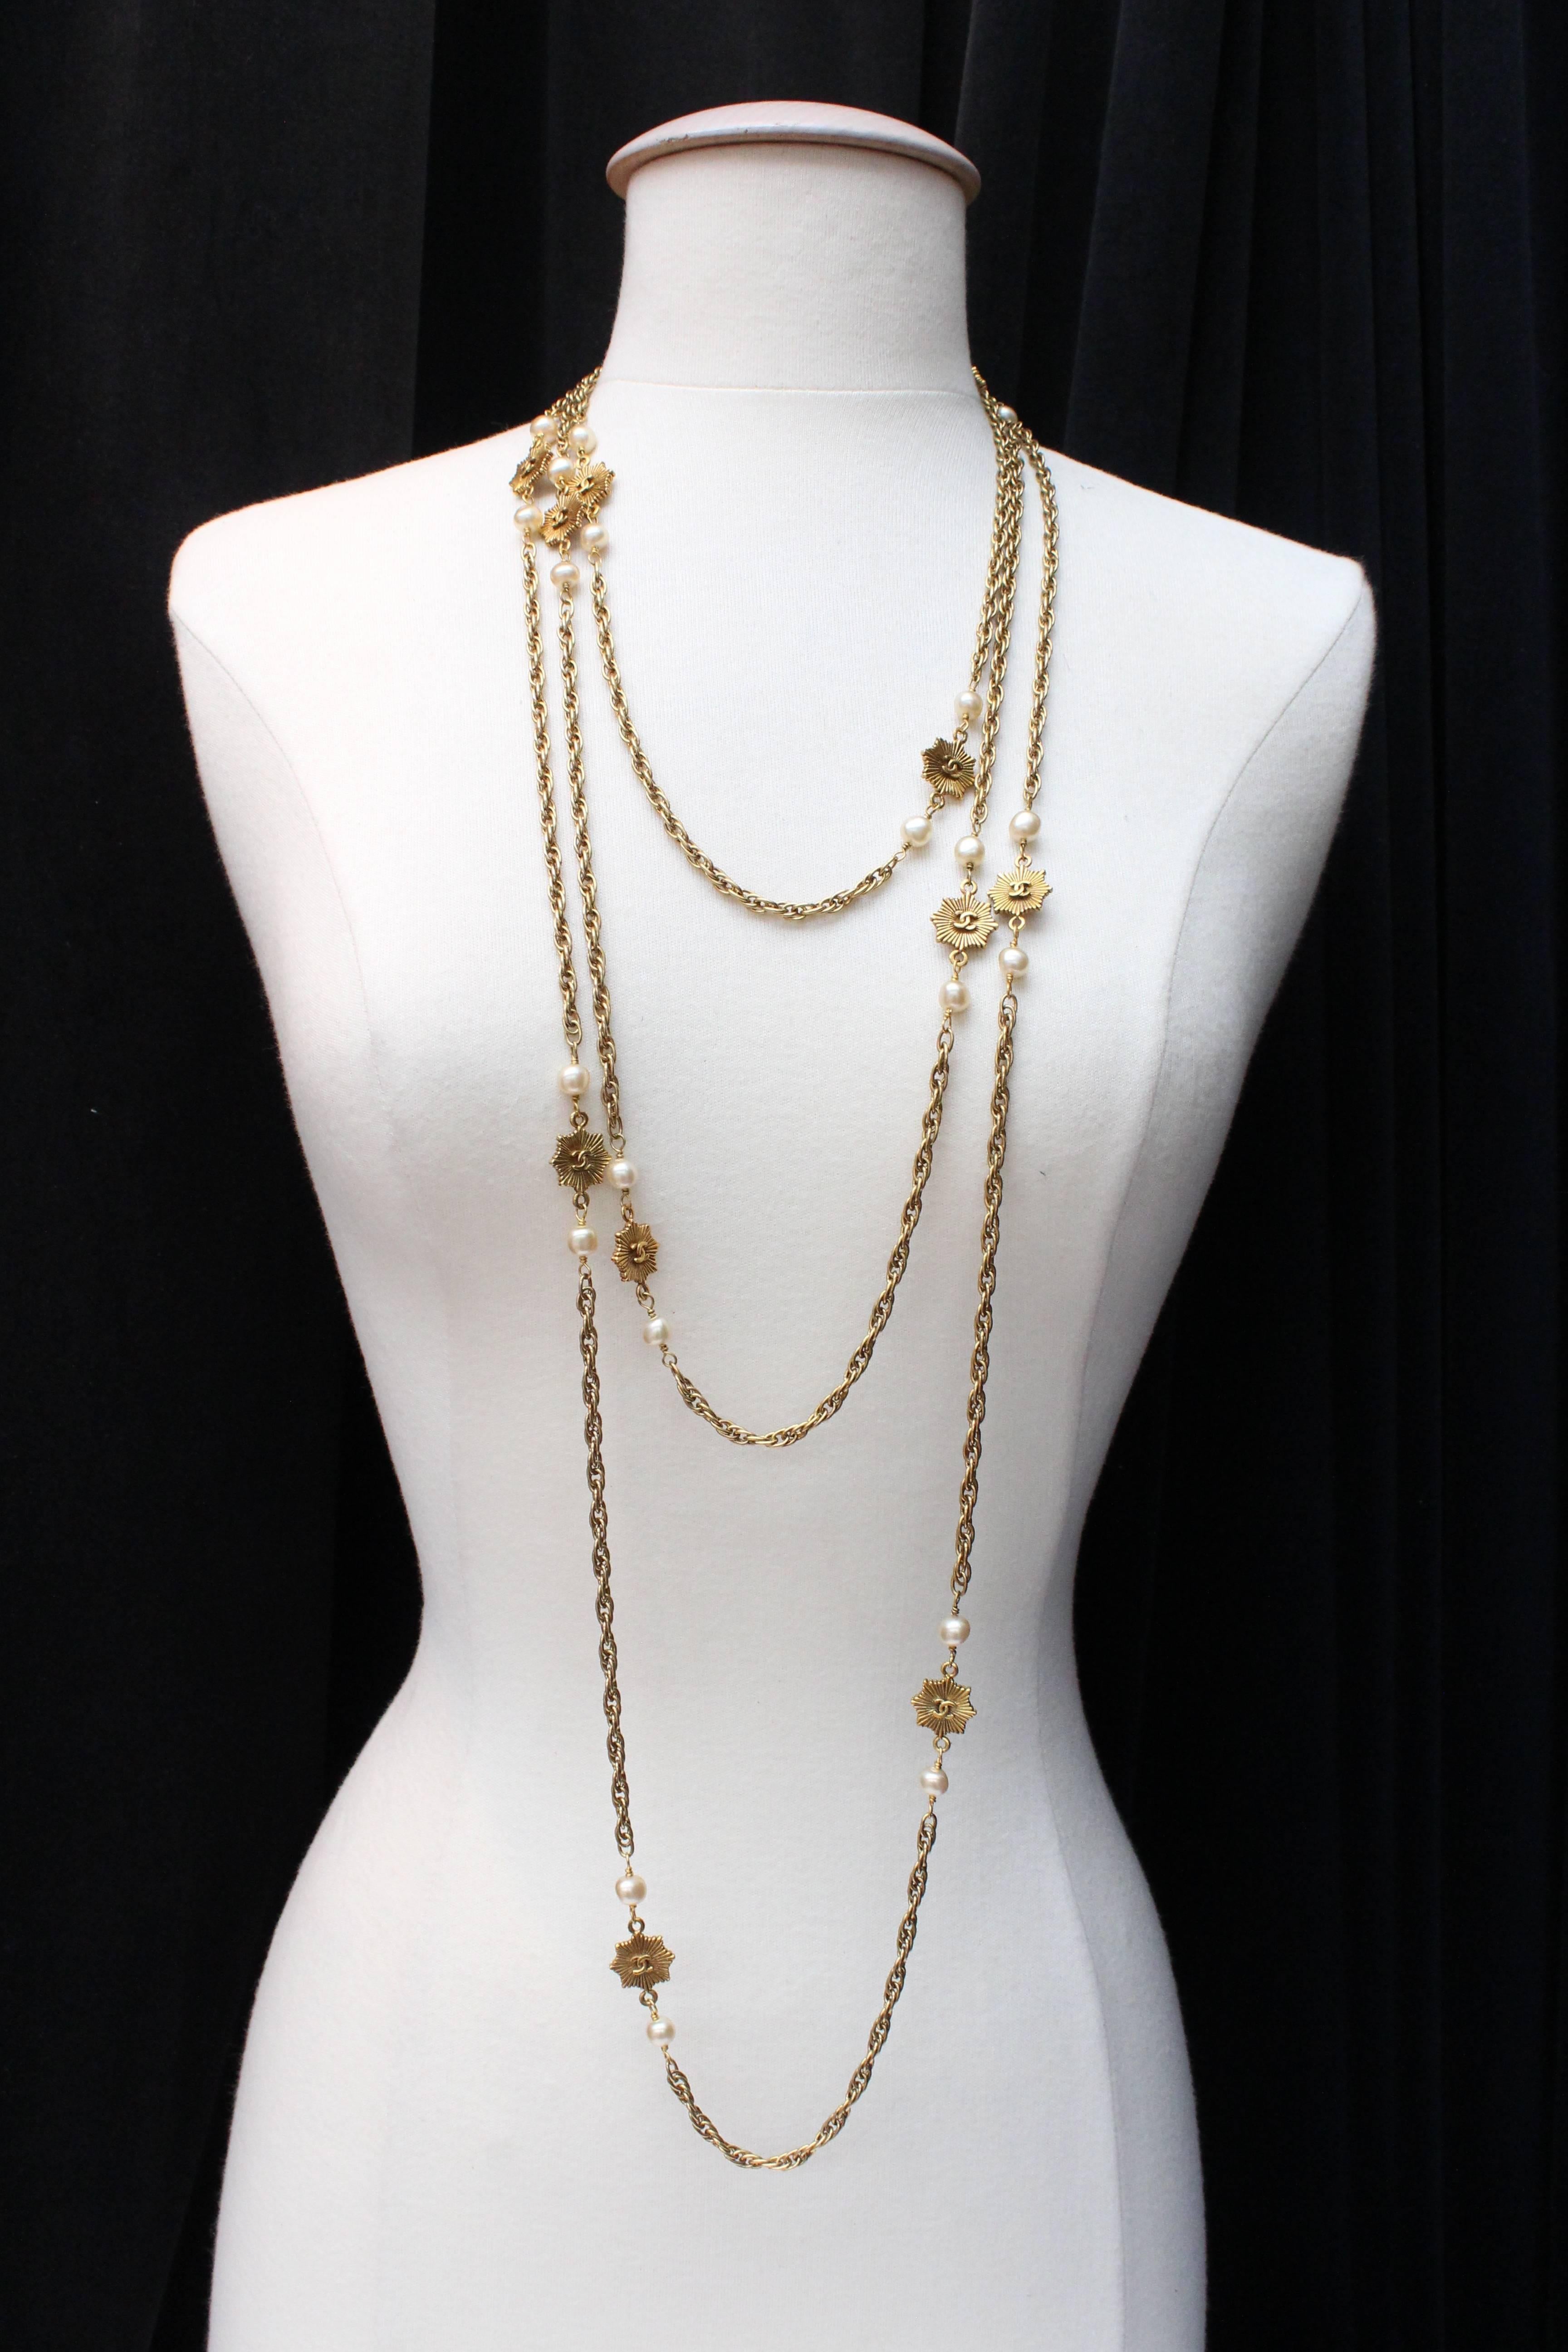 CHANEL (Made in France) Long sautoir necklace composed of a twisted gilded metal chain in antique gold color, alternating with small pearly beads and striated gilded metal stars.  A CC logo is encrusted in the center of the stars. The sautoir  is